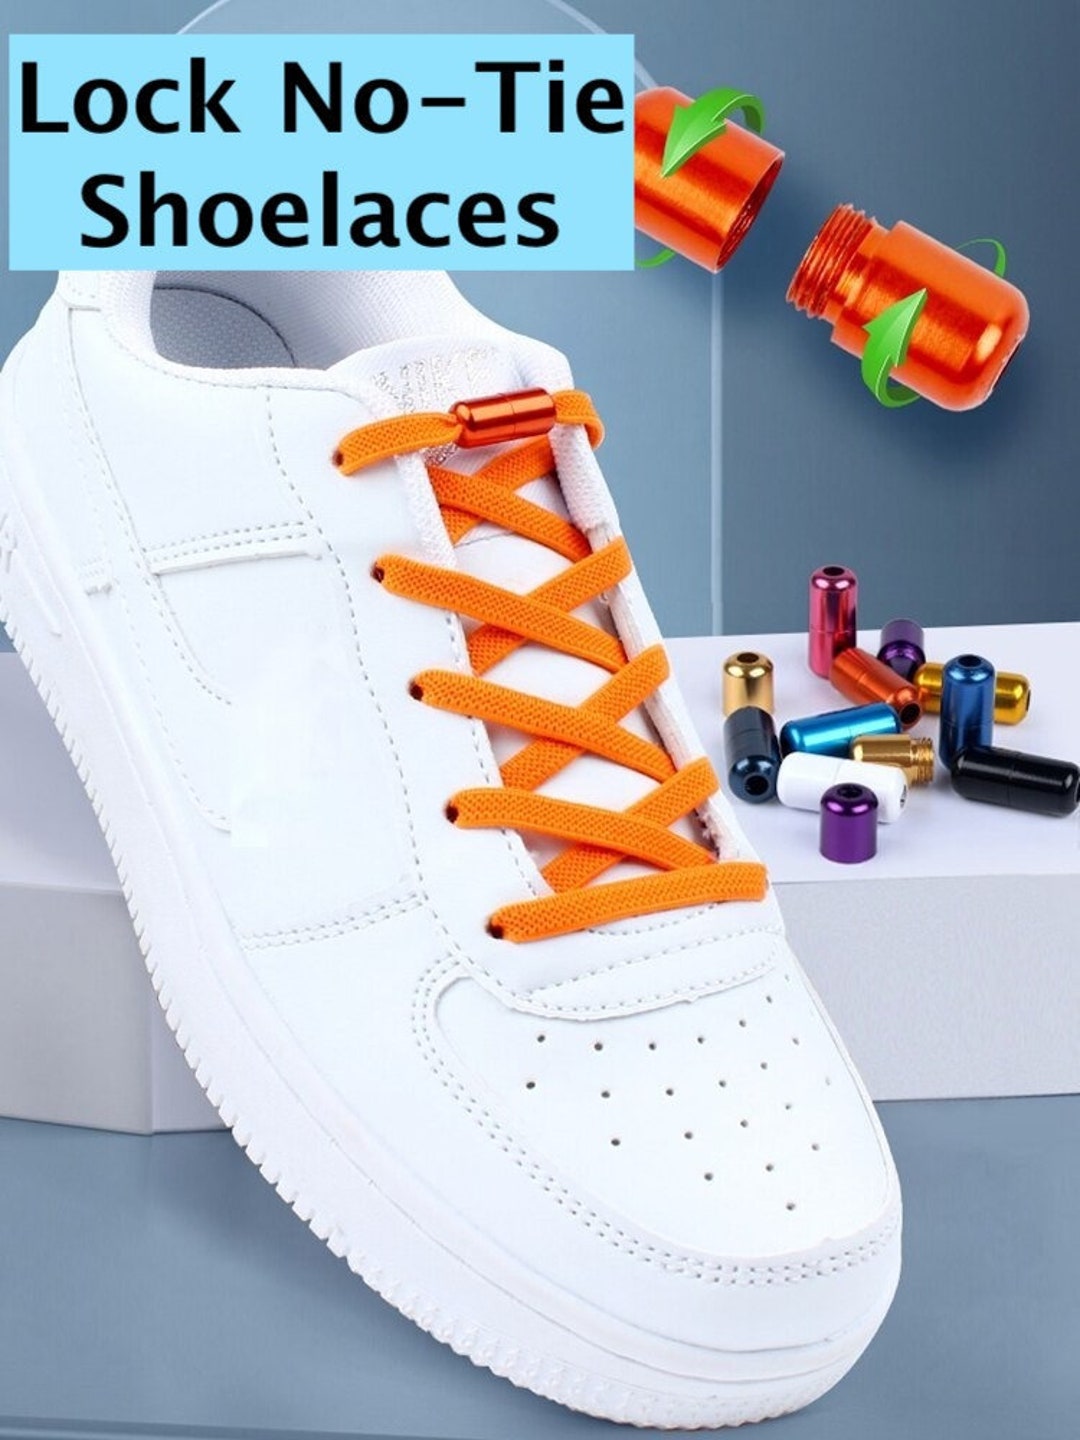 Round Elastic Shoelace Without Tying Stretch Shoelaces for Sneakers No Tie  Shoe Laces for Kids NICE Lock Tieless Lace Strings